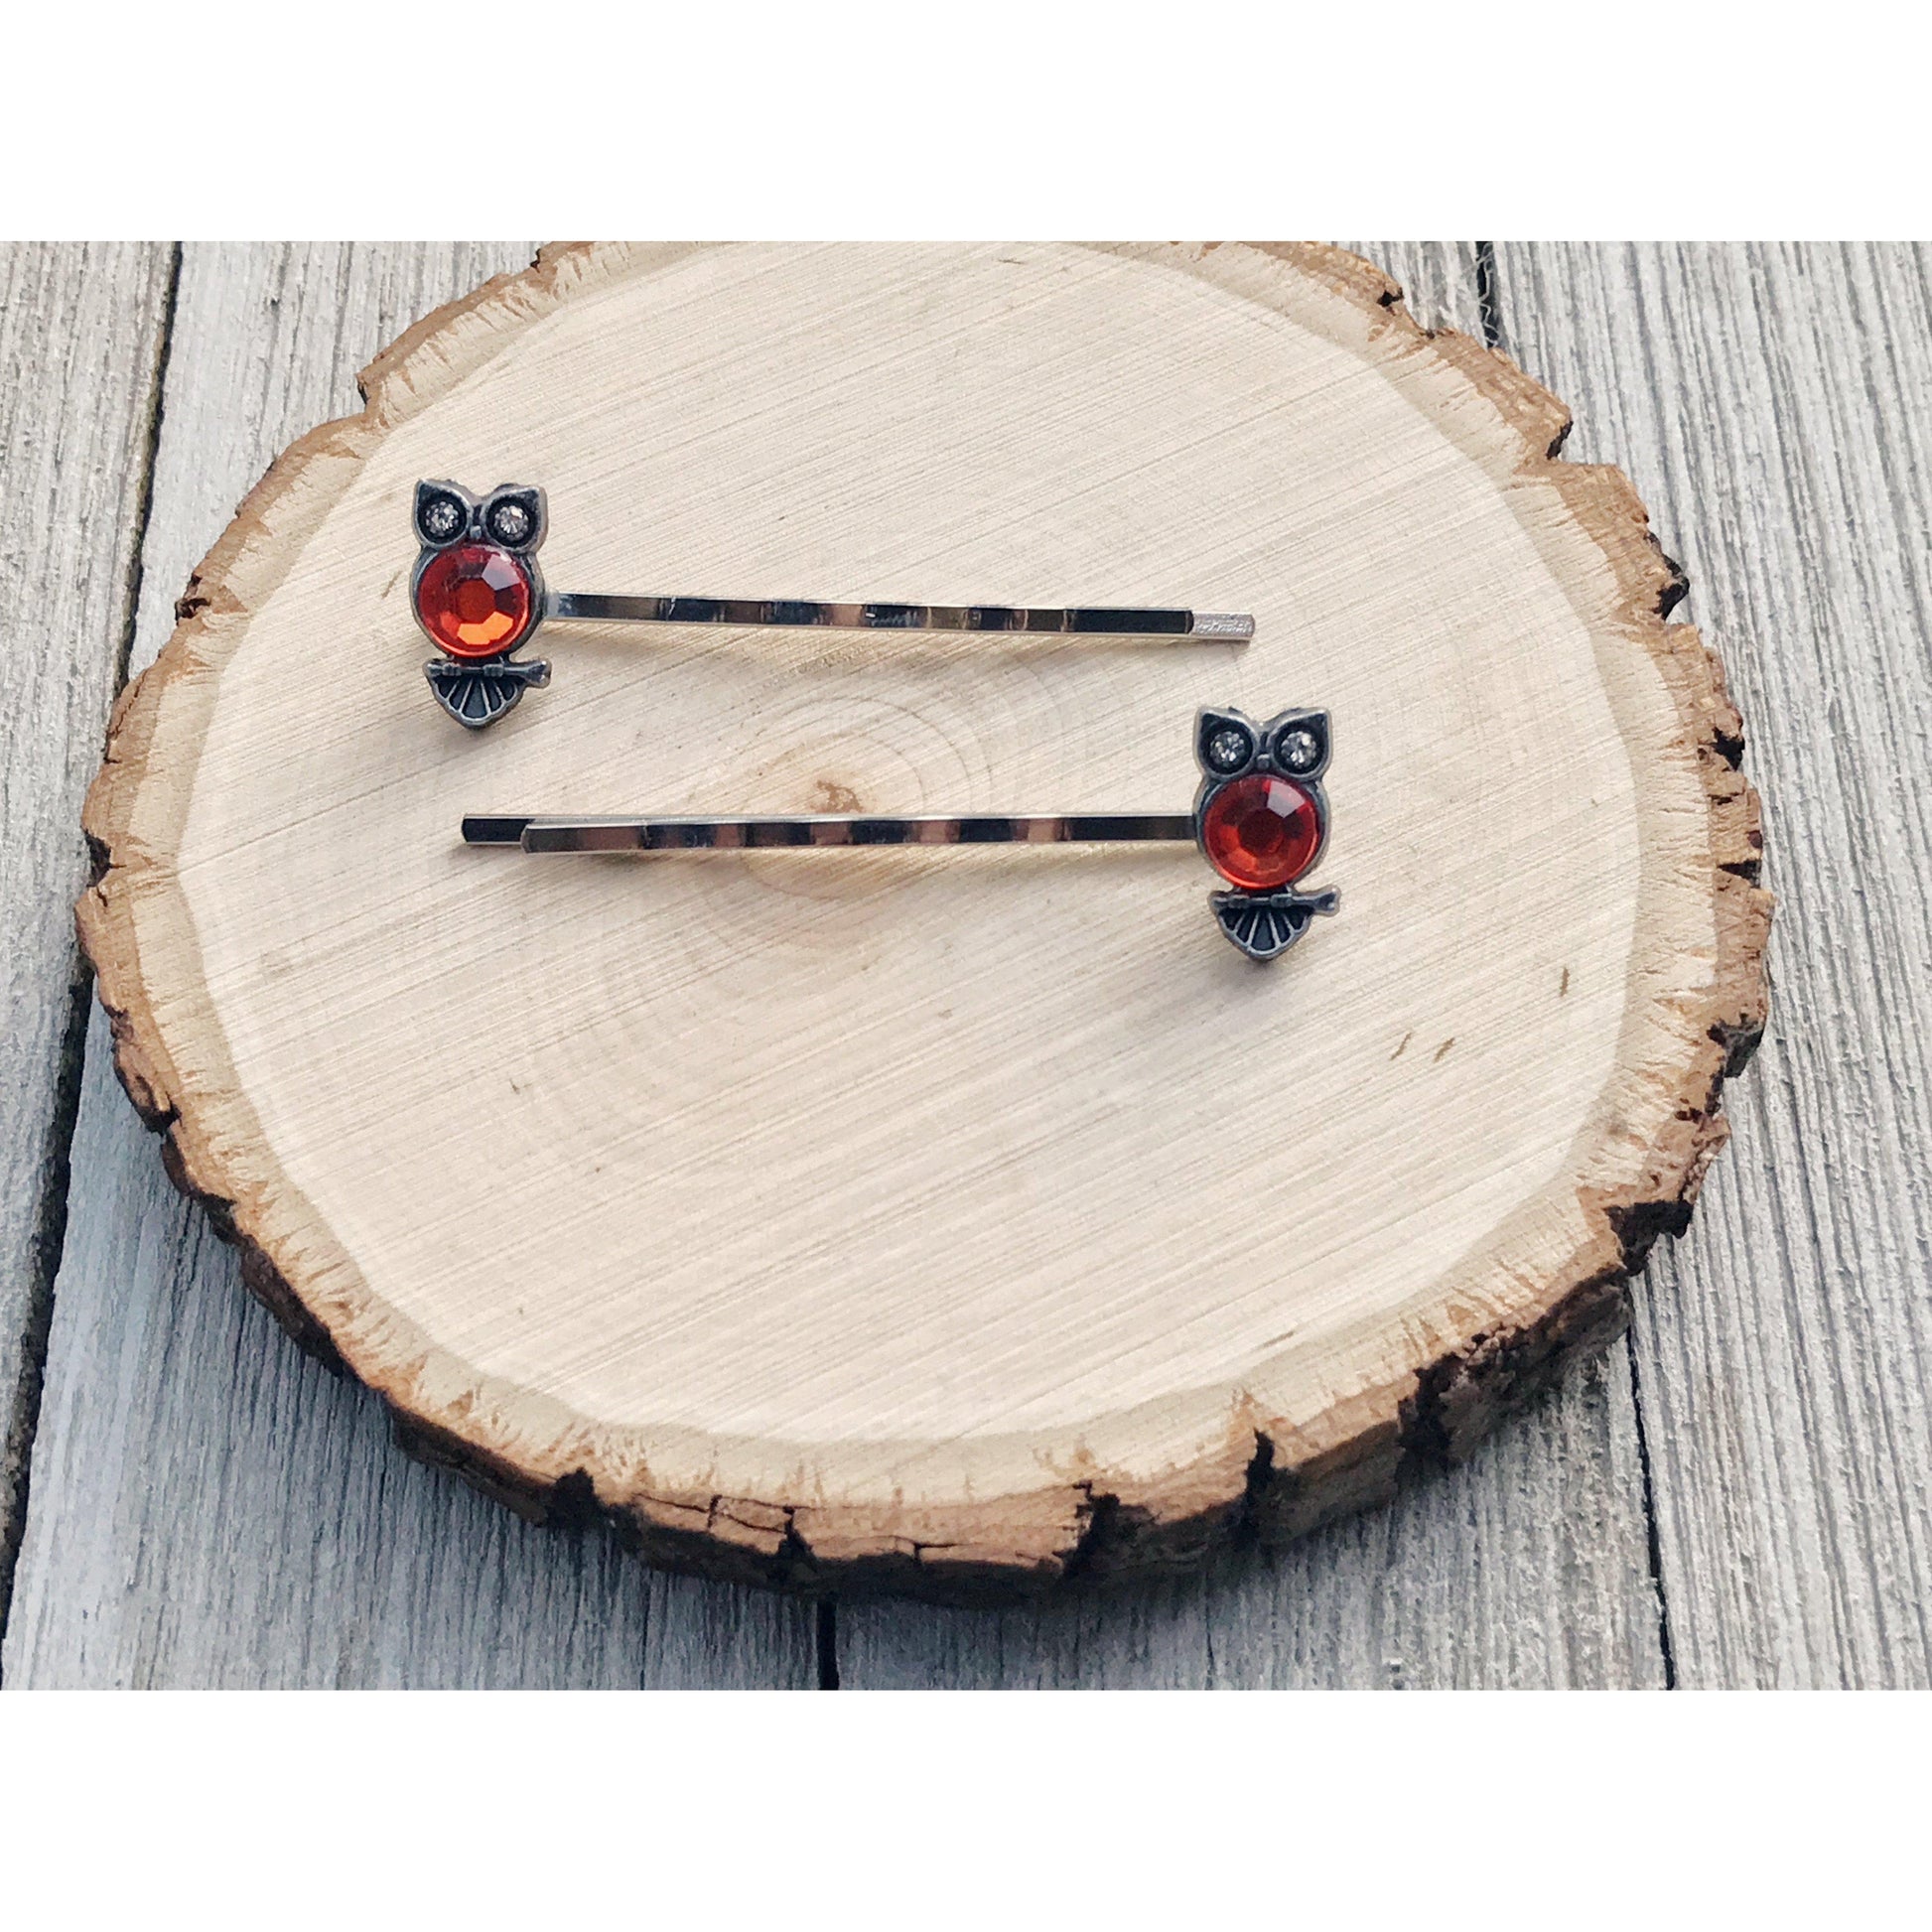 Orange Rhinestone Owl Bobby Pins: Sparkling Owl Accents for Unique Hairstyles